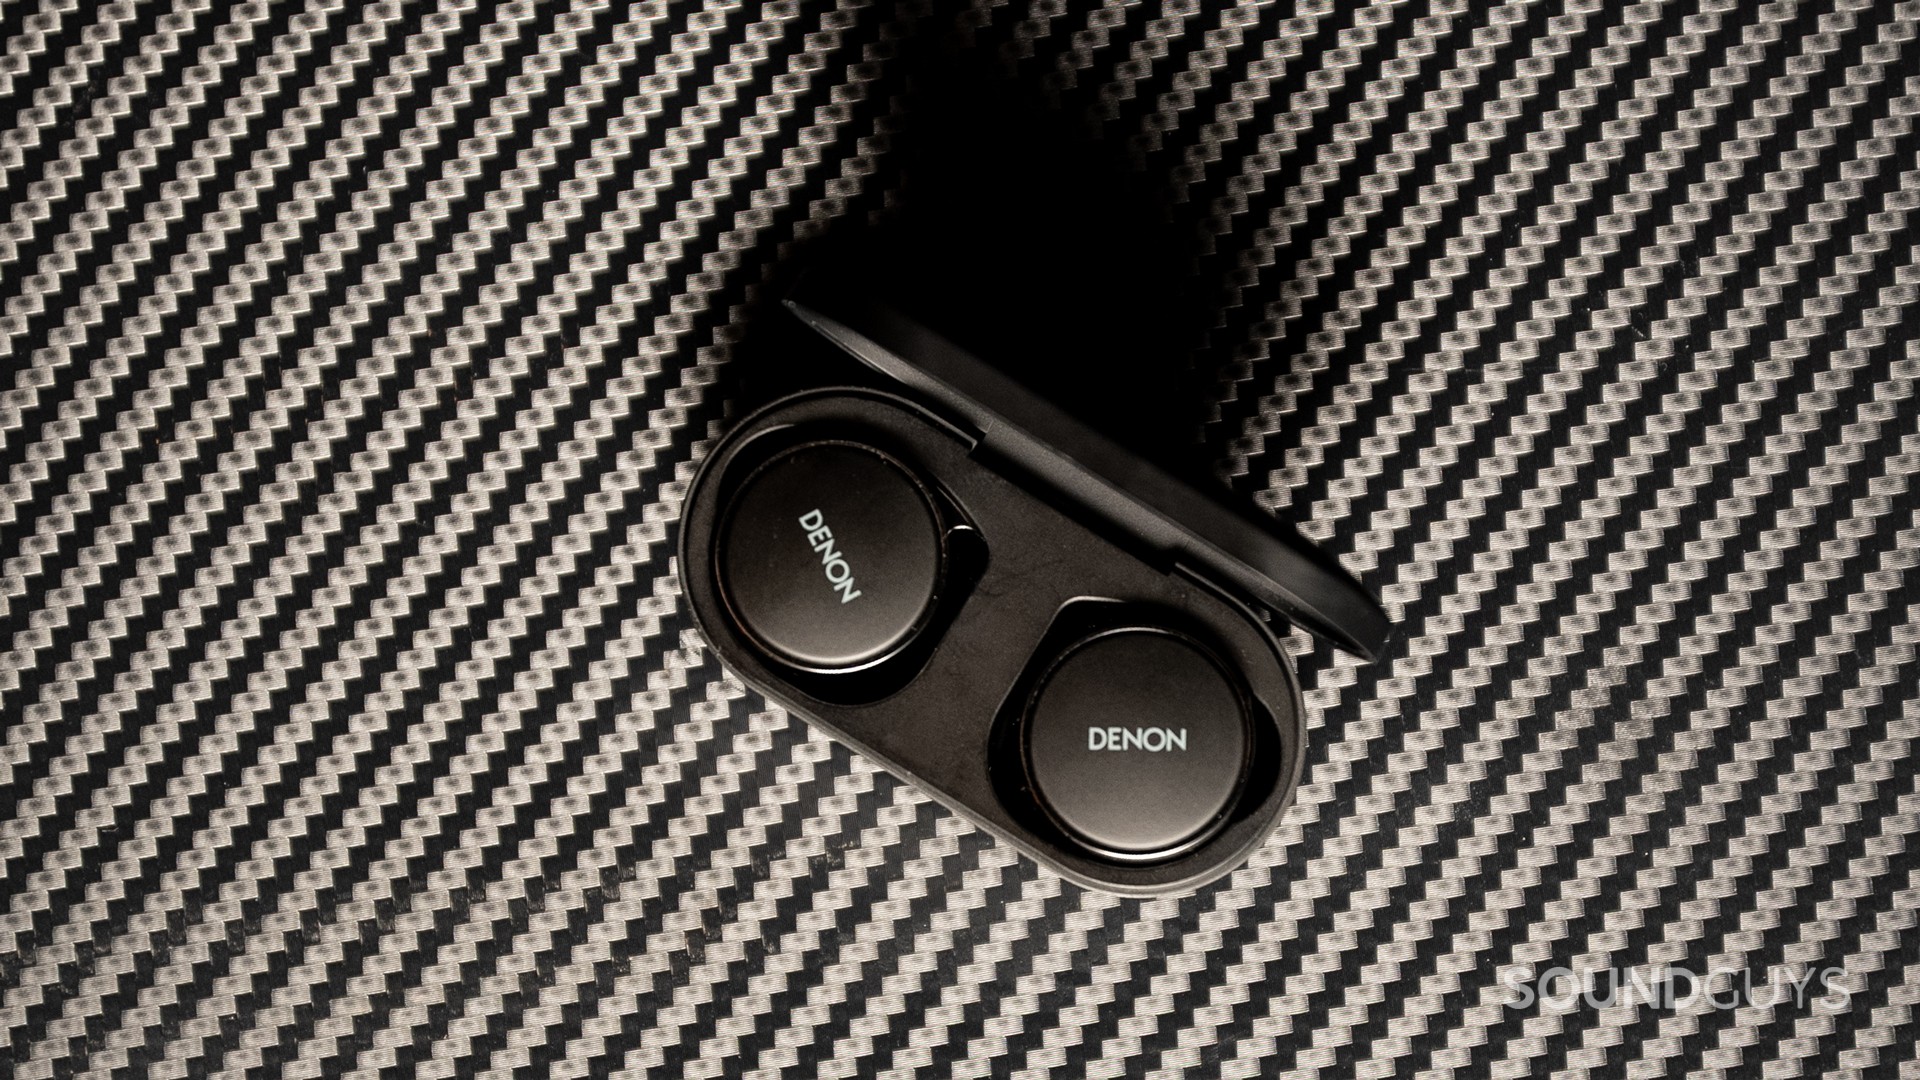 The case of the Denon PerL Pro offers wireless charging.